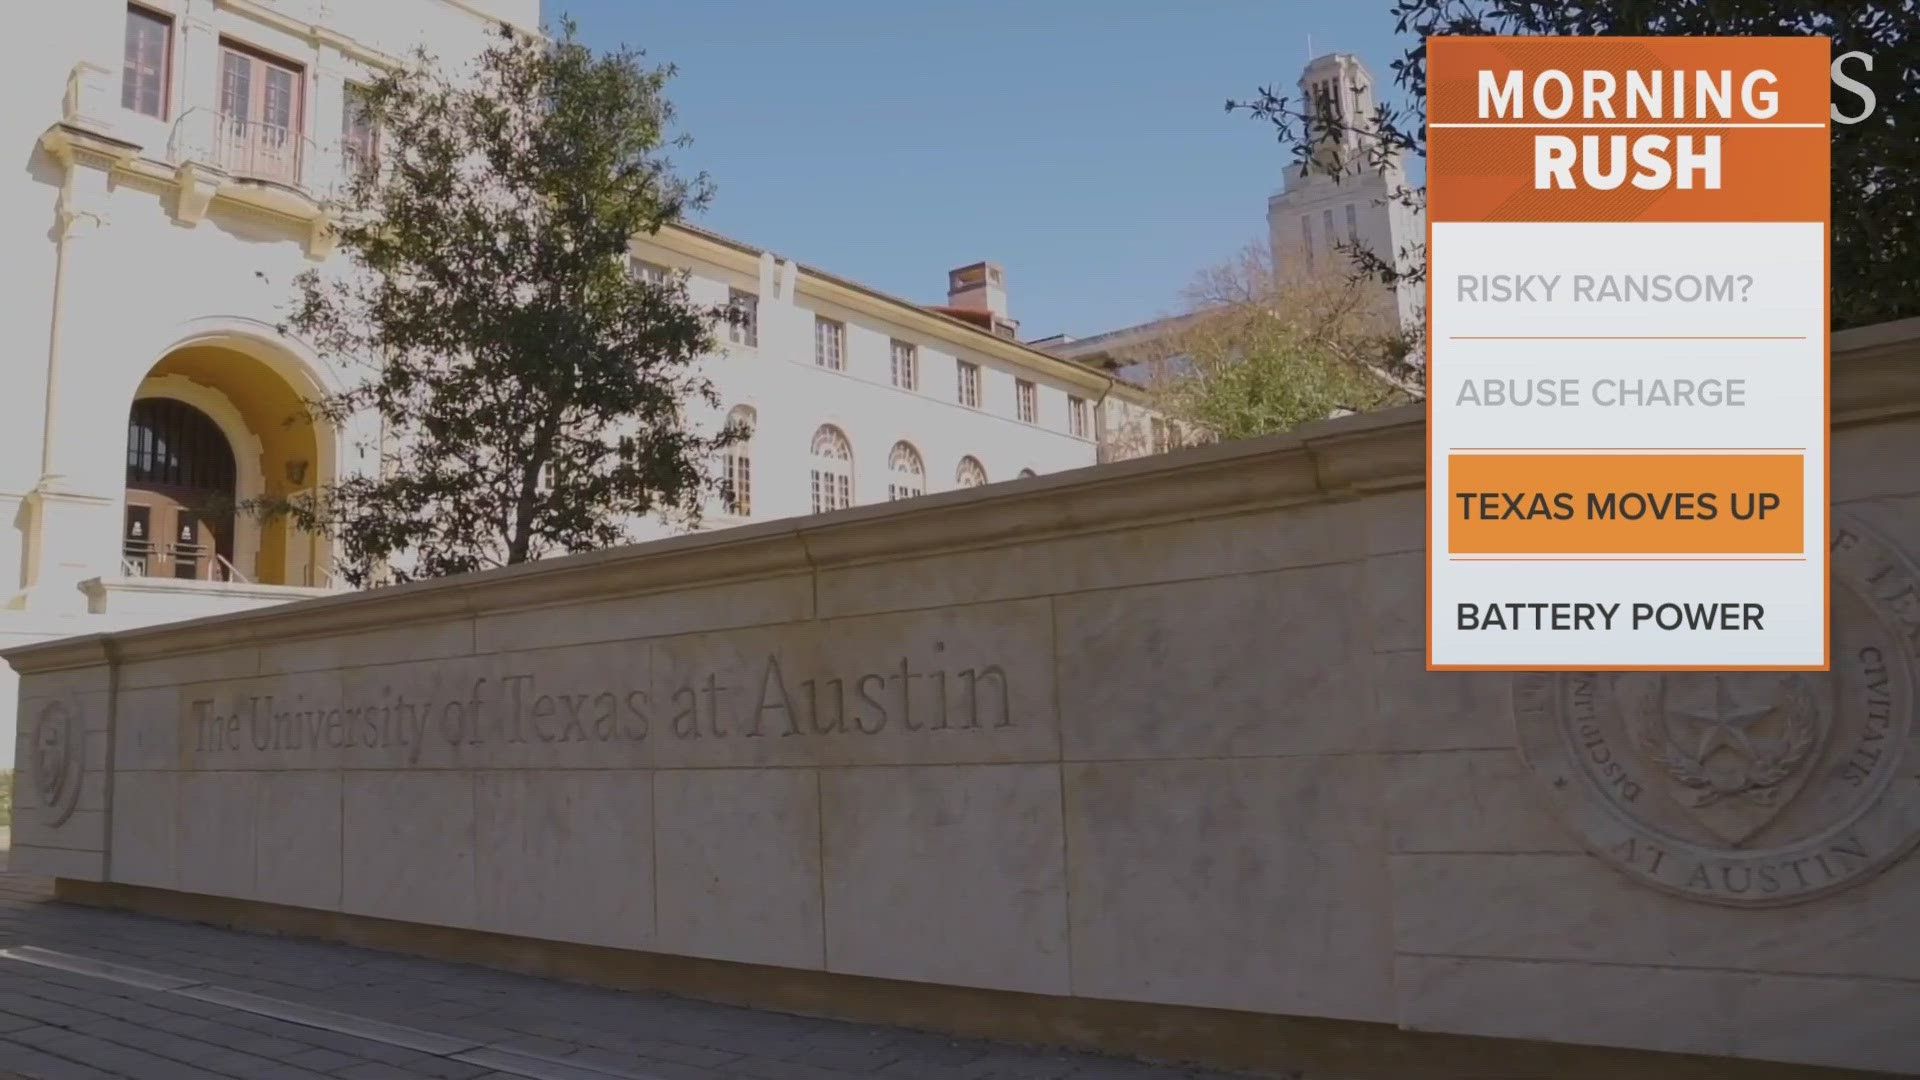 According to the U.S. News & World Report, UT Austin is now ranked No. 9 among national public universities, up one spot form last year.